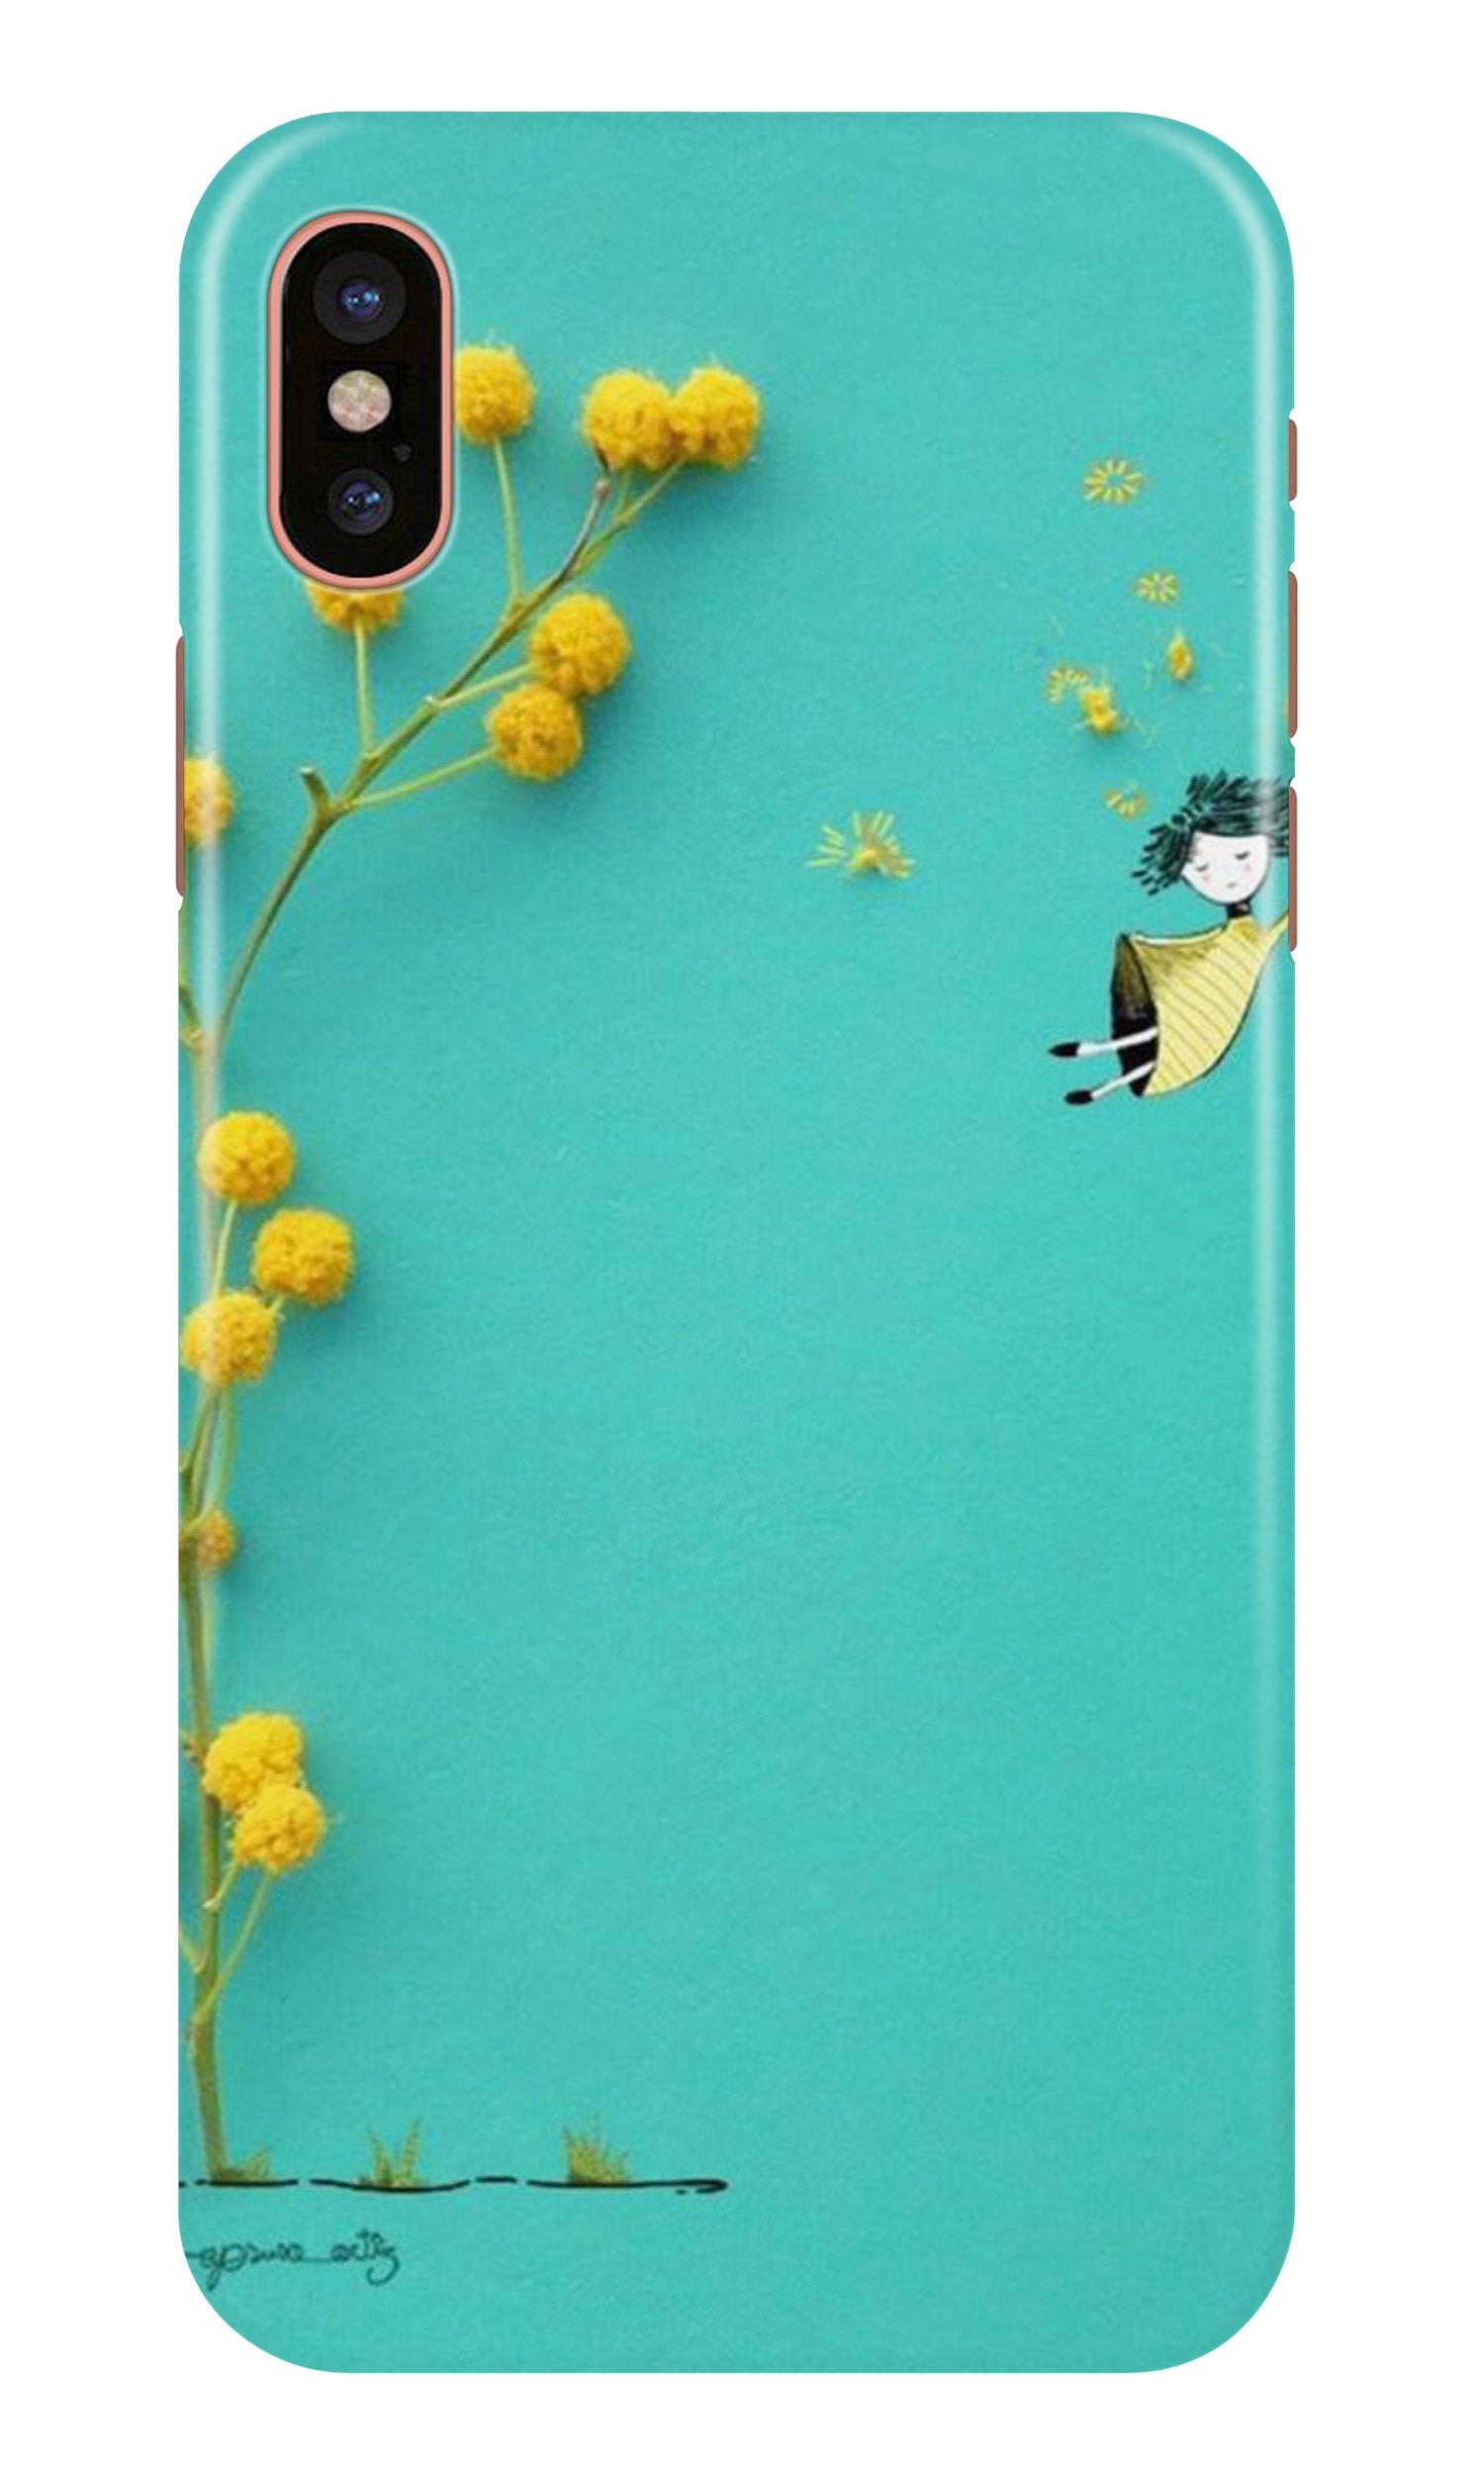 Flowers Girl Case for iPhone Xs (Design No. 216)